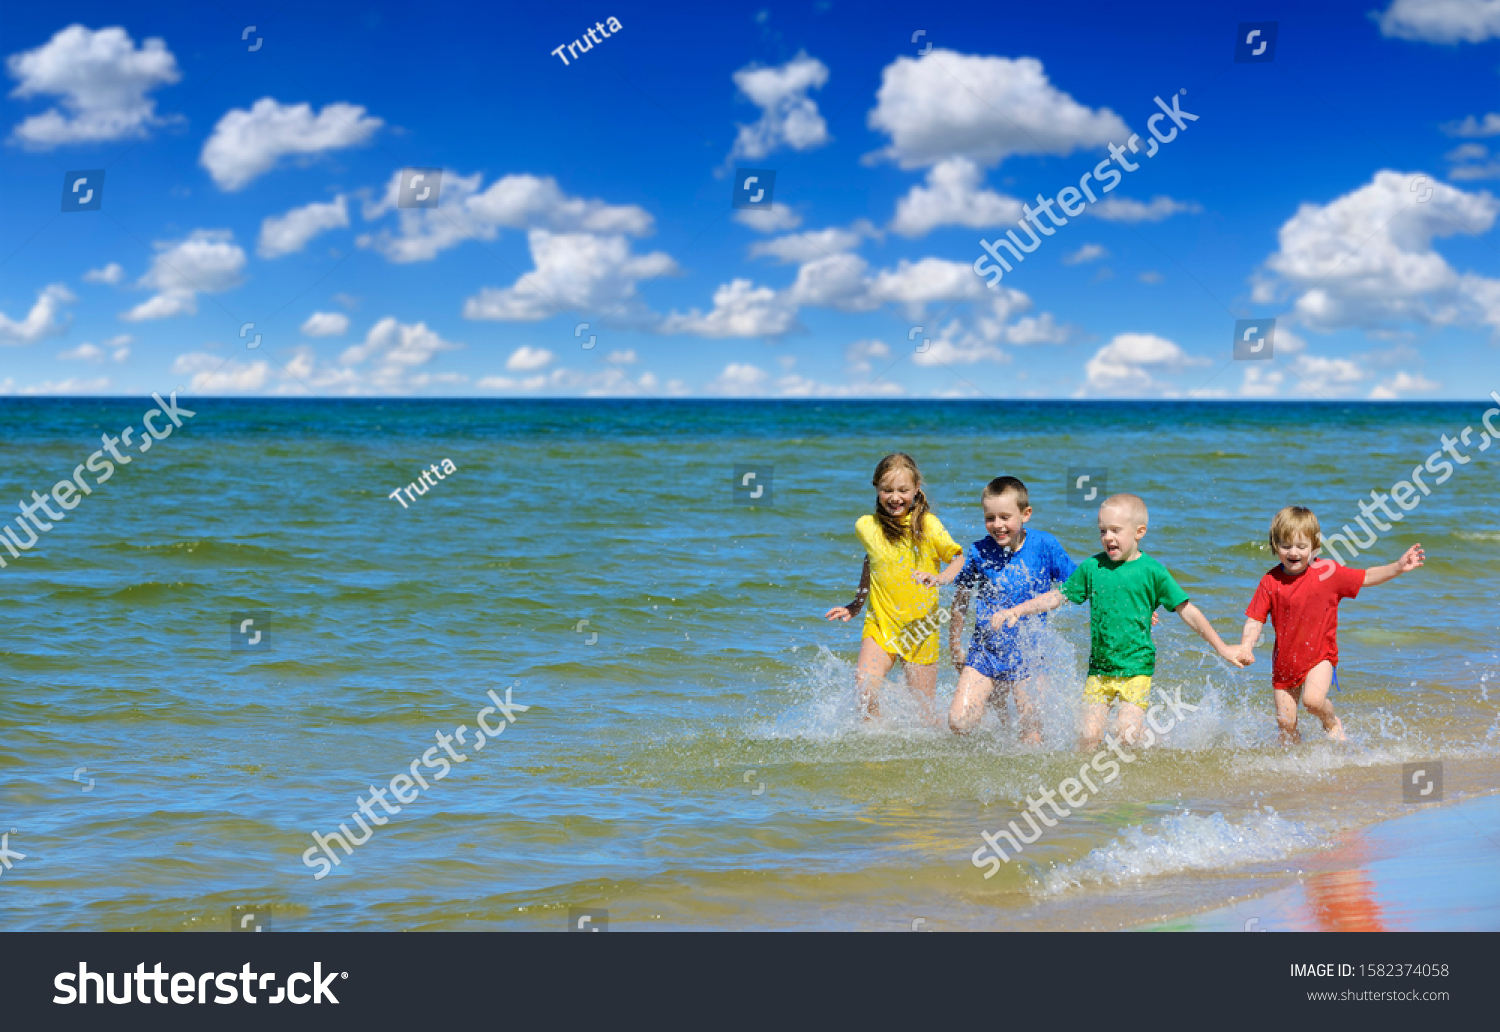 Two girls and two boys in colorful t-shirts running on a sandy beach, blue sky white clouds in the background #1582374058